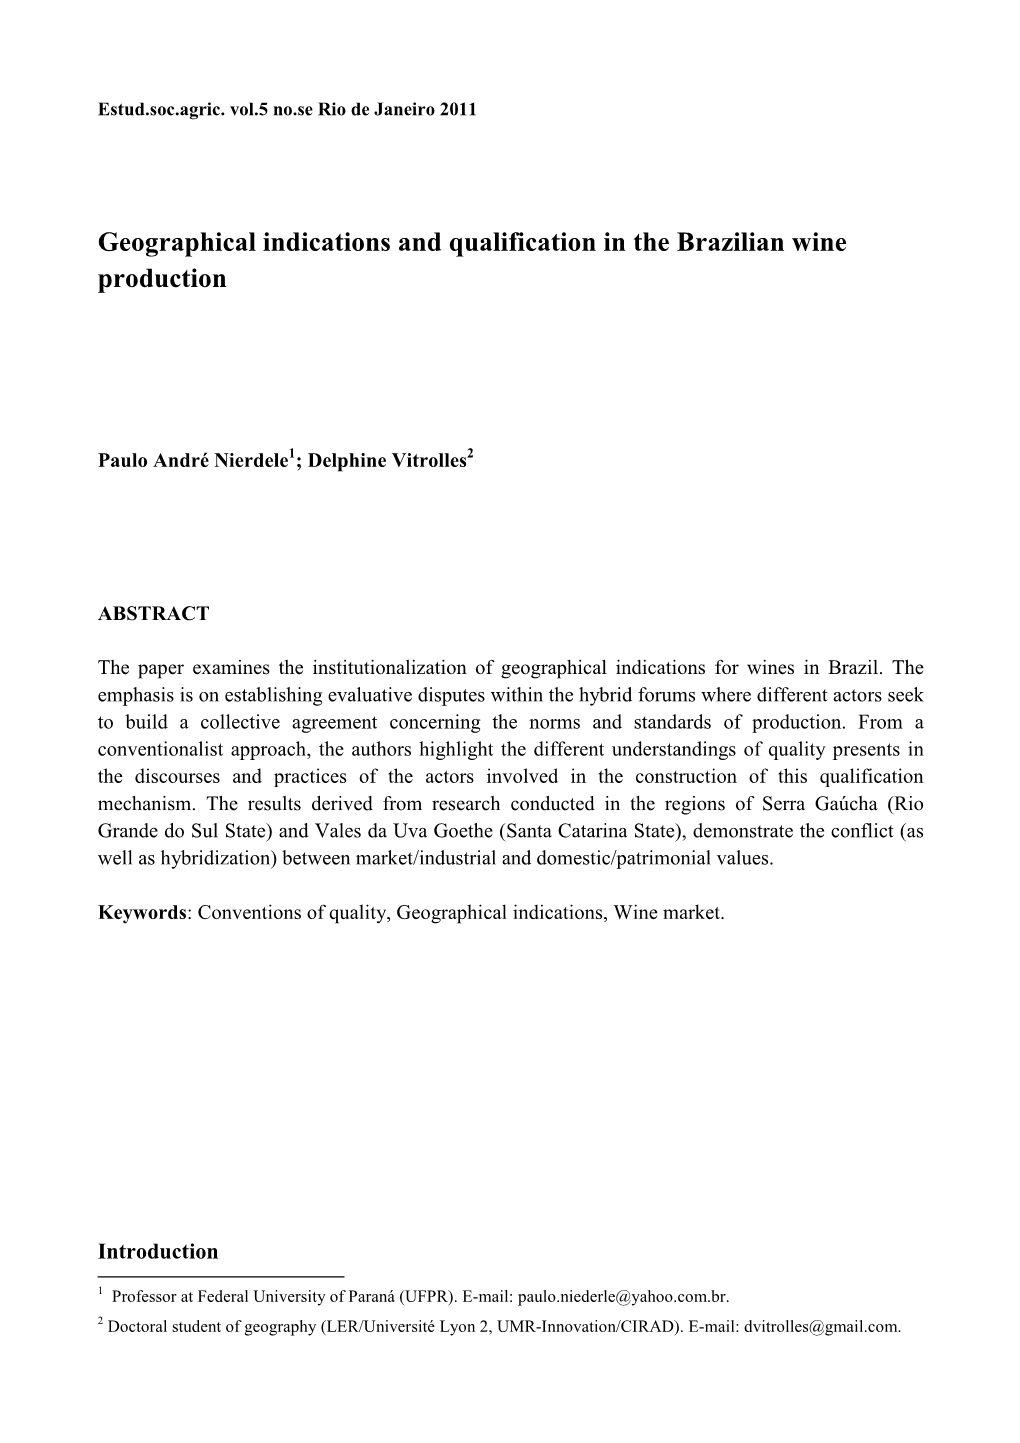 Geographical Indications and Qualification in the Brazilian Wine Production